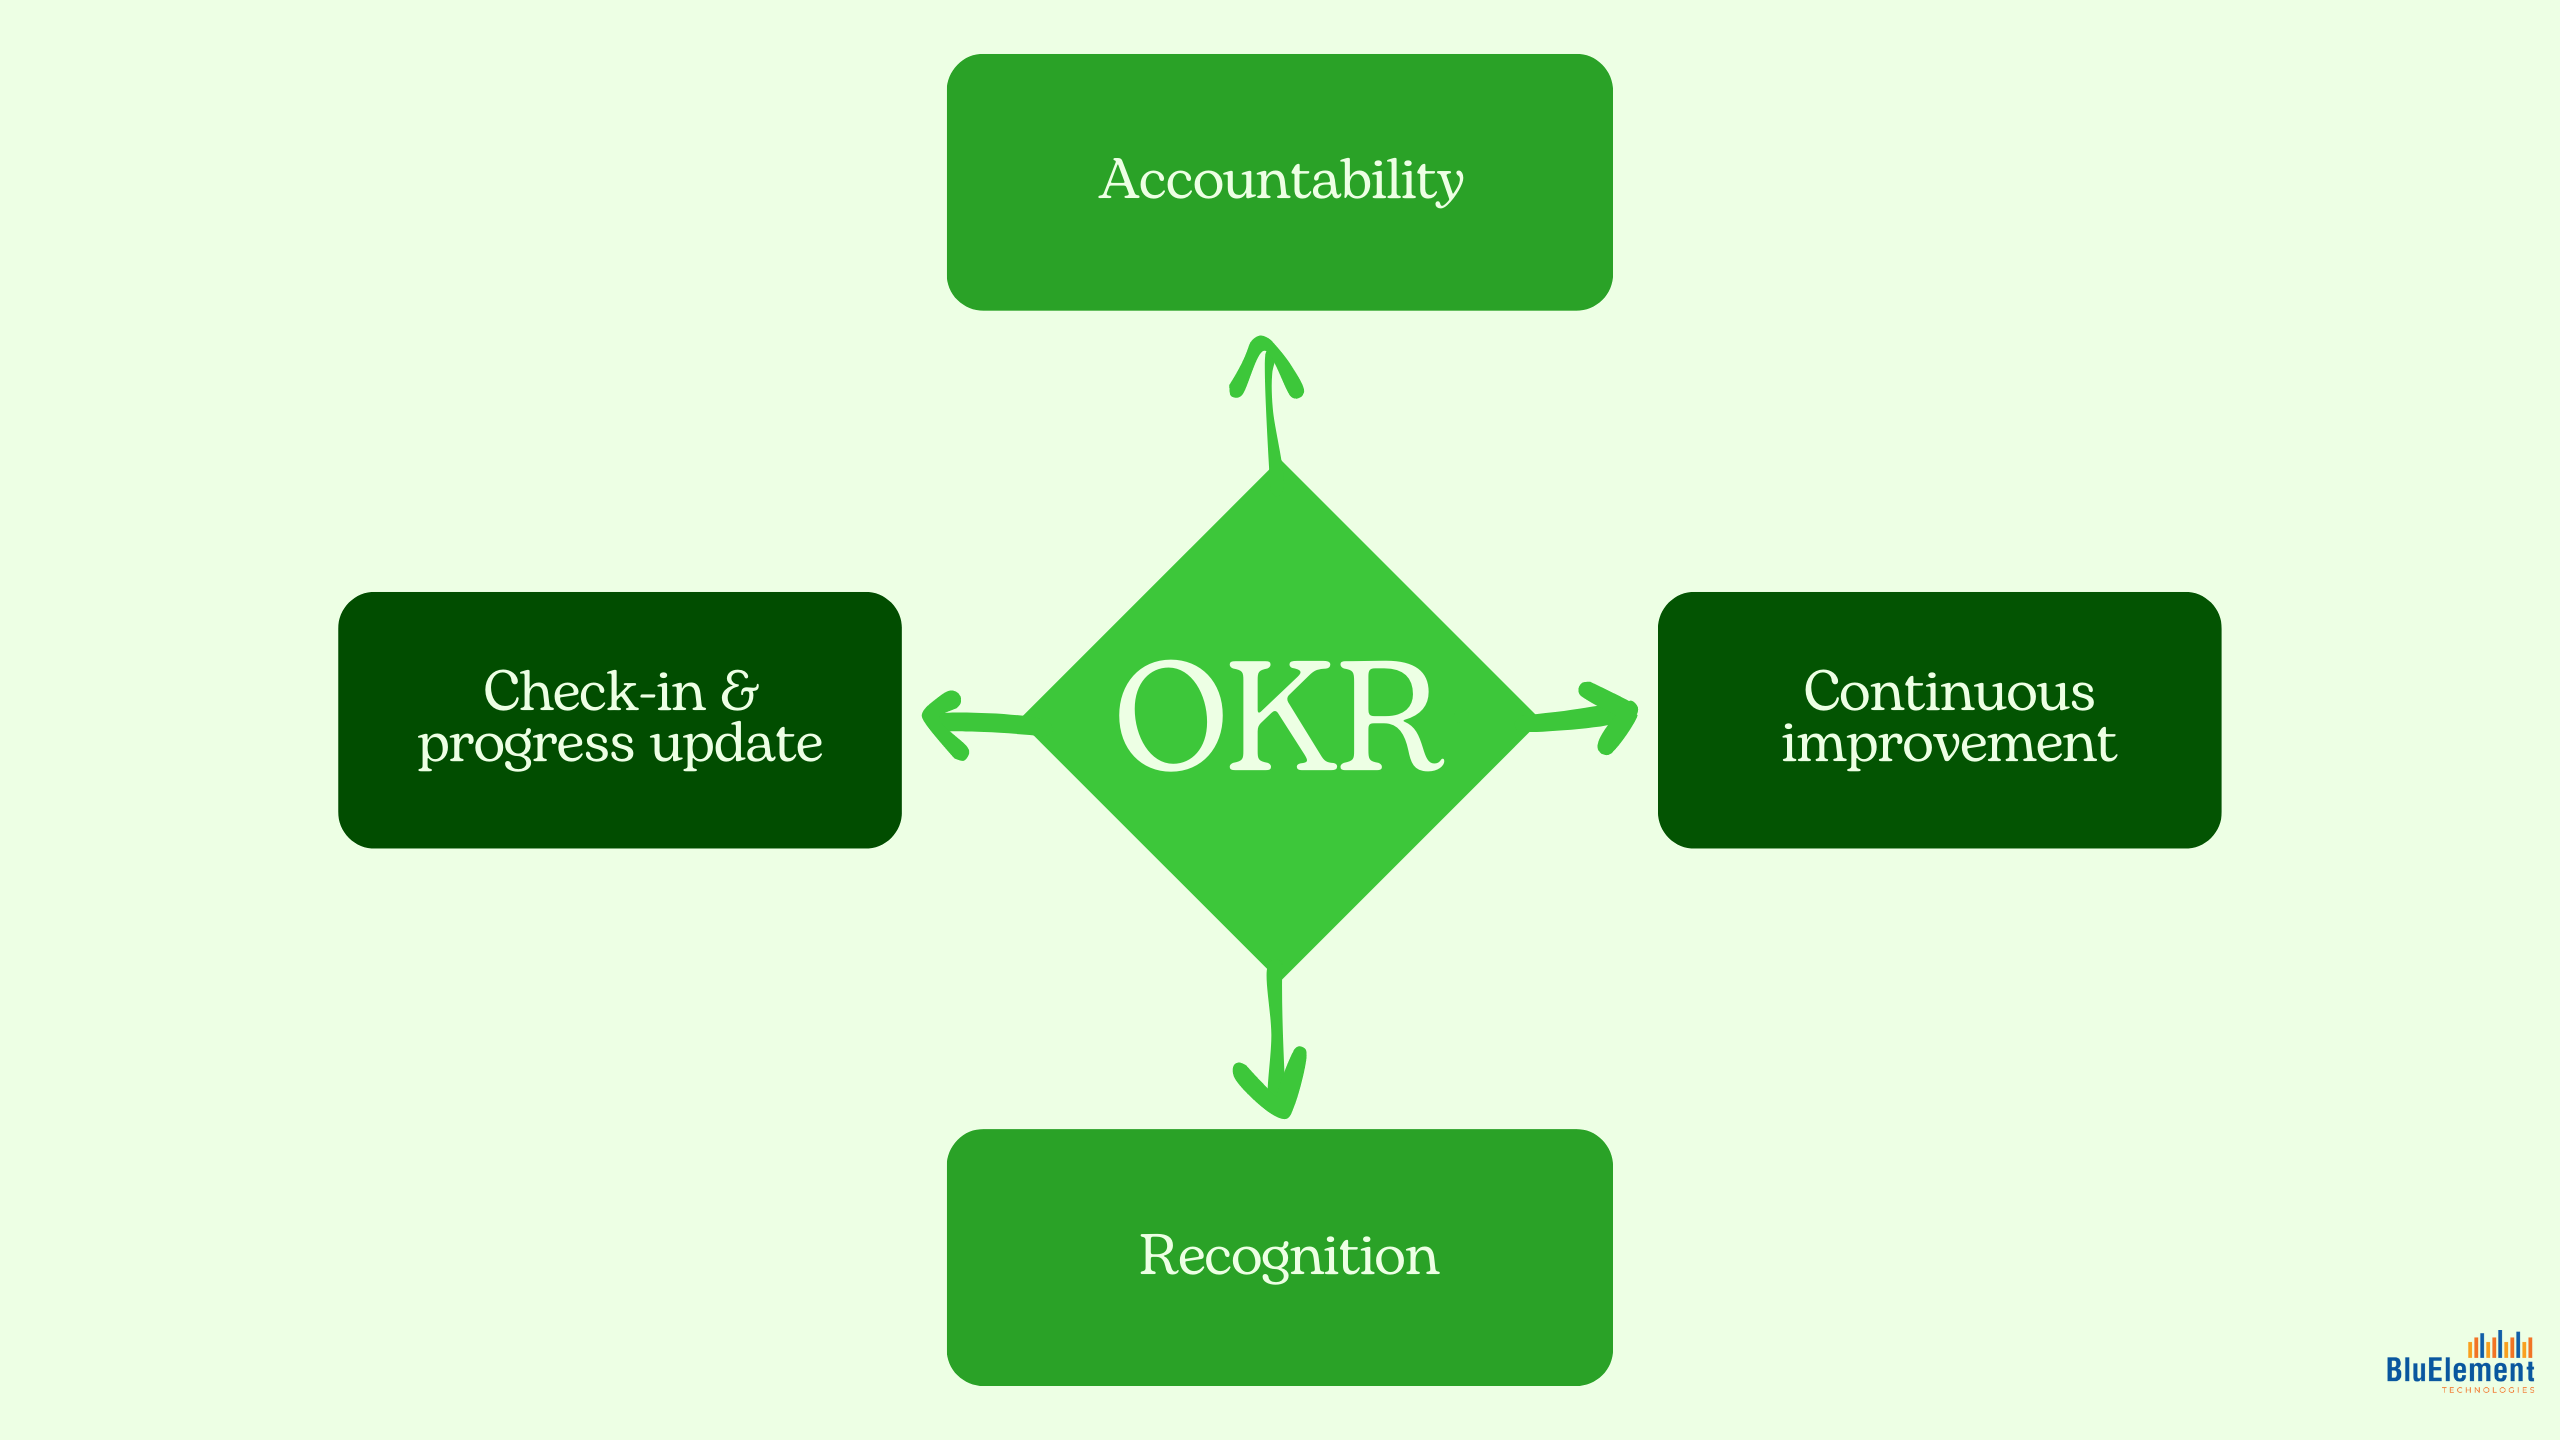 OKR accountability and recognition